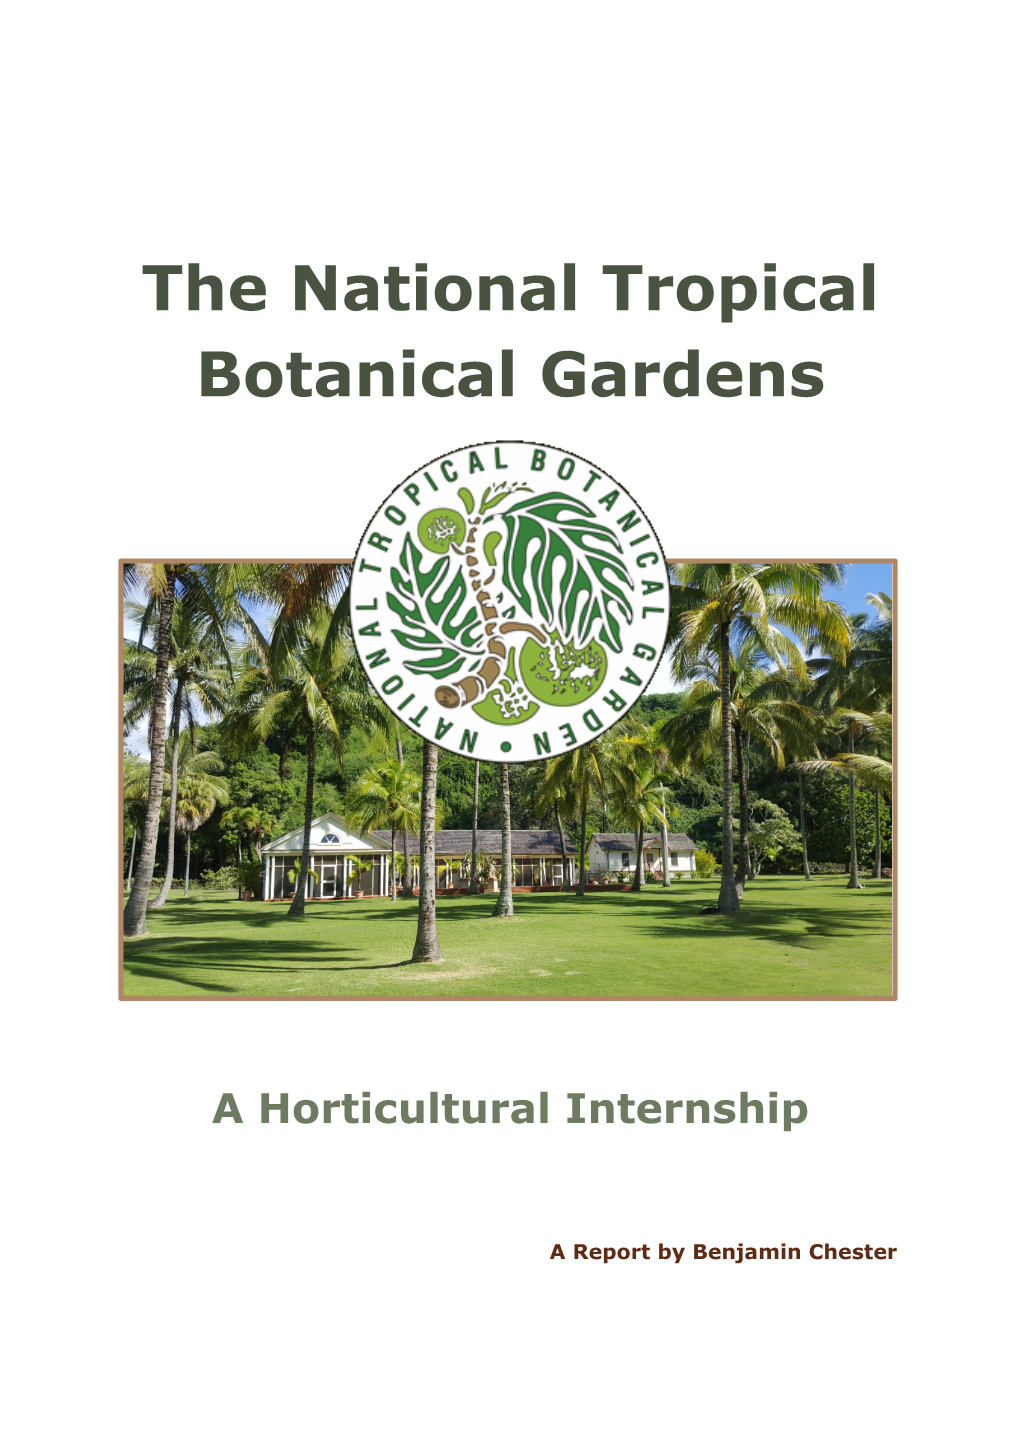 The National Tropical Botanical Gardens in Hawaii